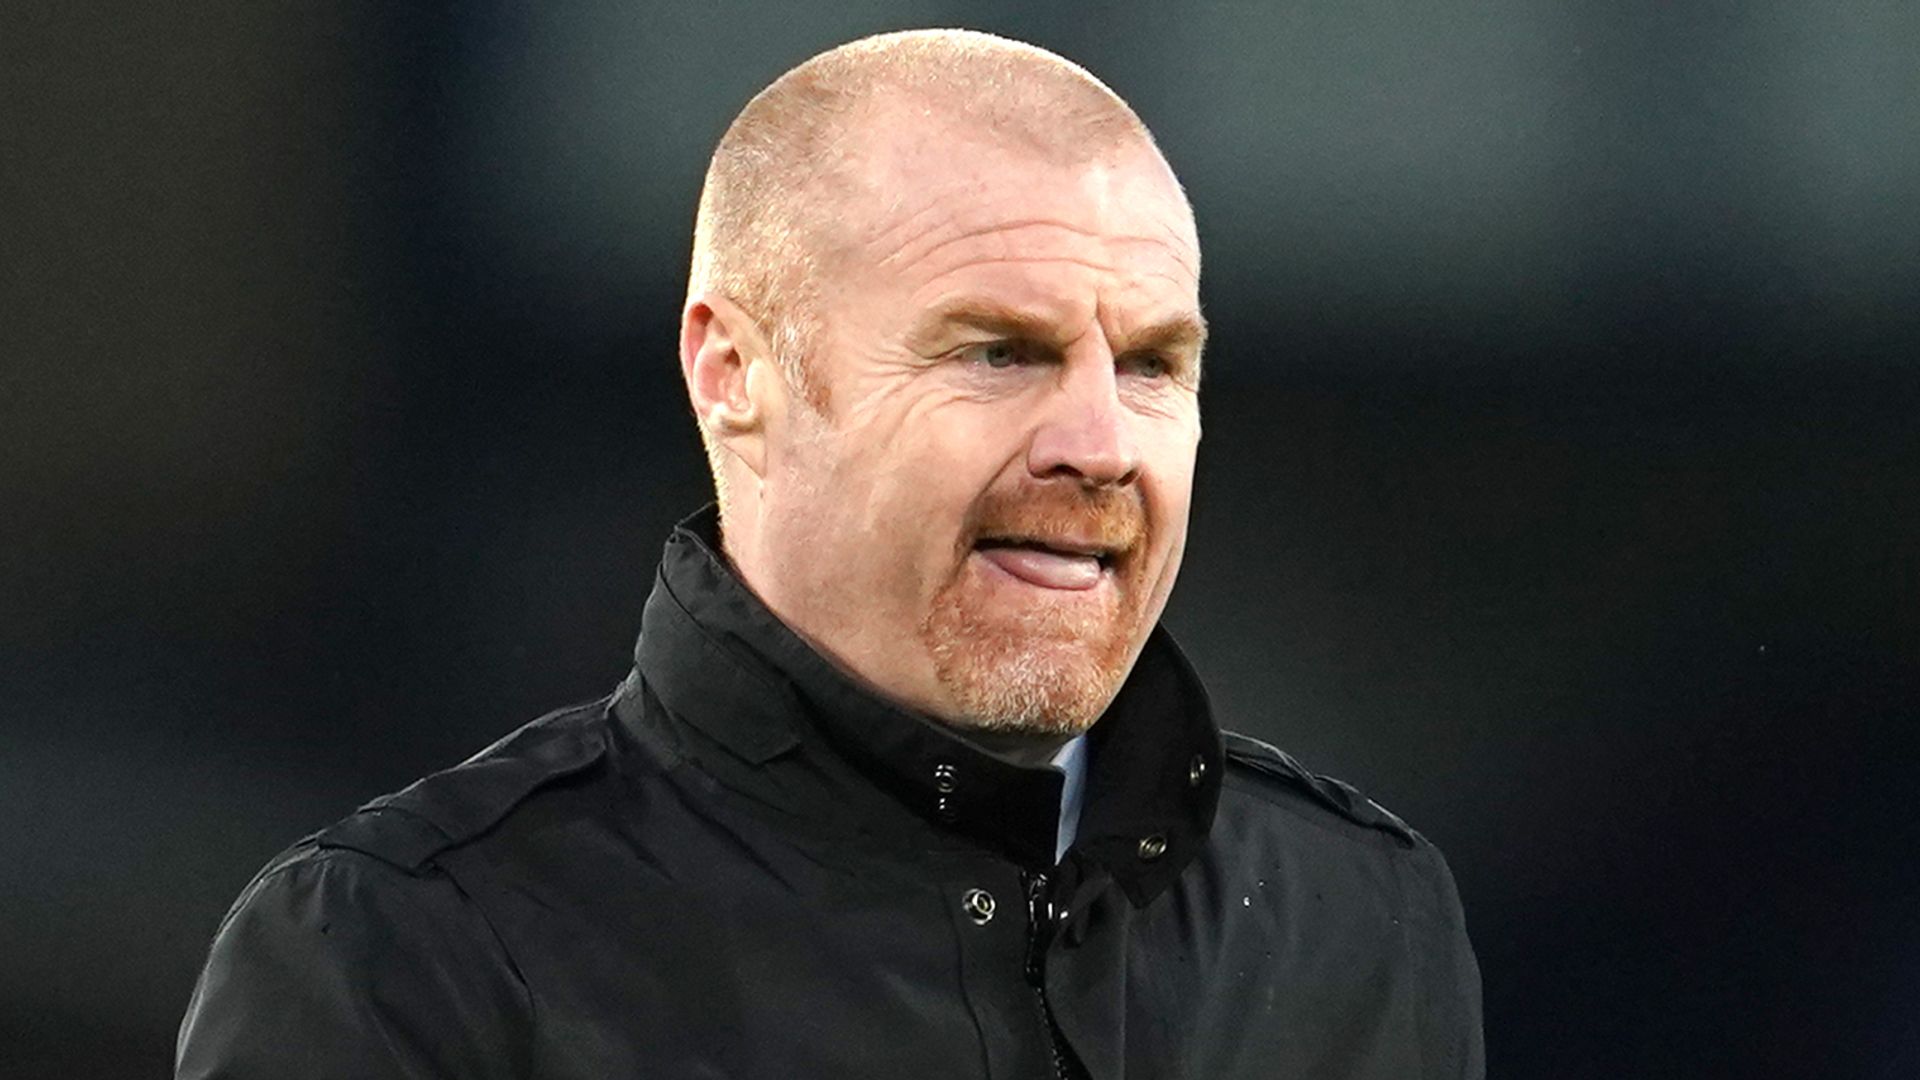 Live football on Sky Sports: Dyche on MNF for West Ham vs Bournemouth